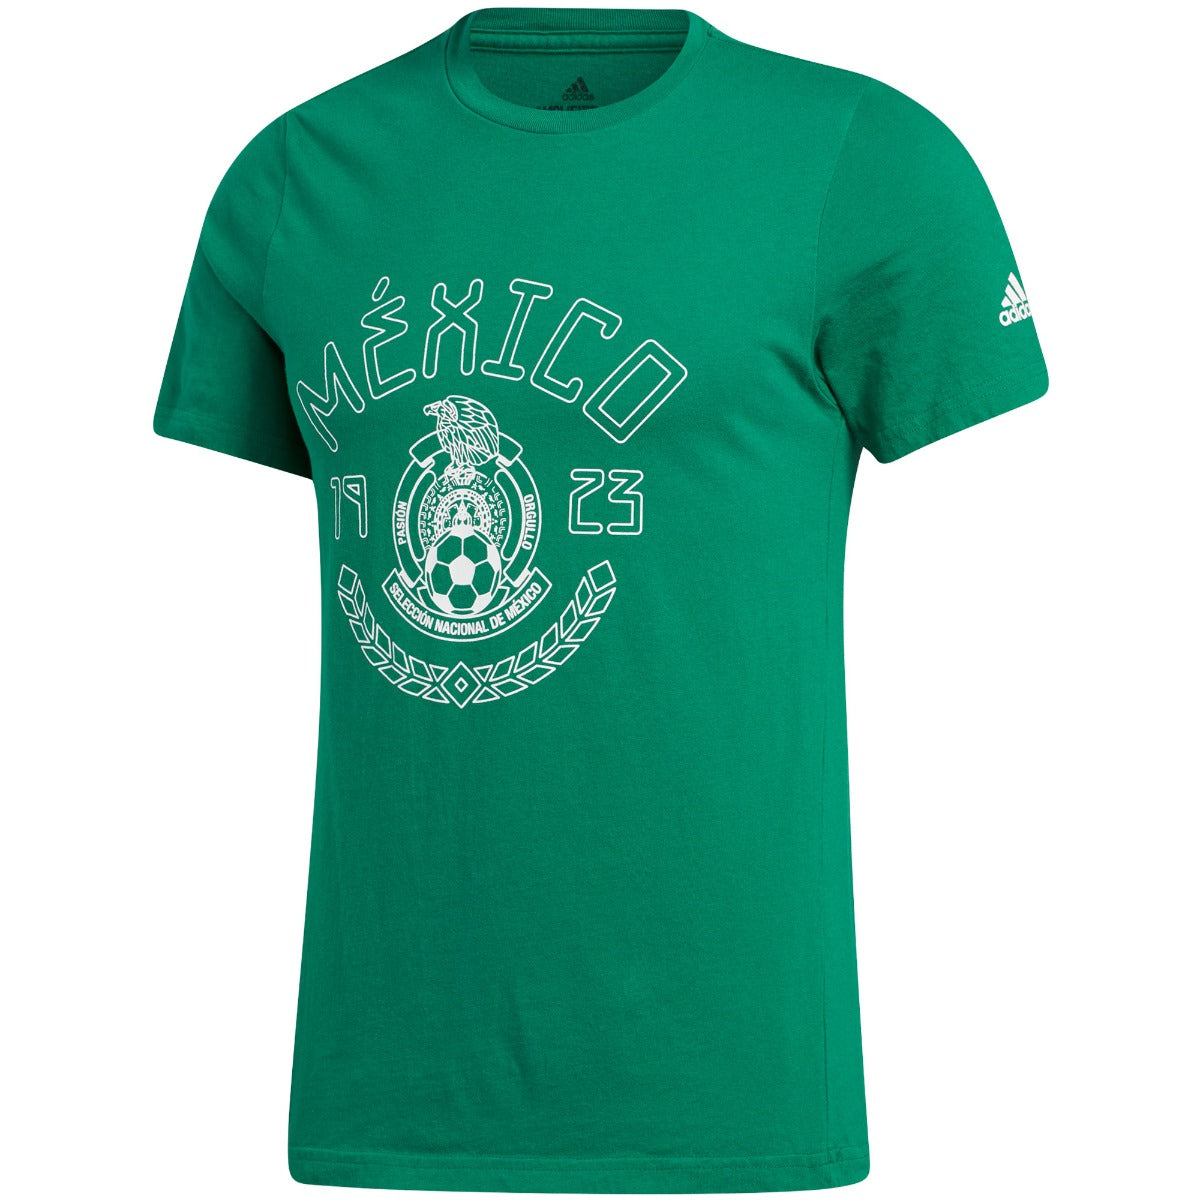 Adidas 2021-22 Mexico Amplifier SS Tee - Green (Front)